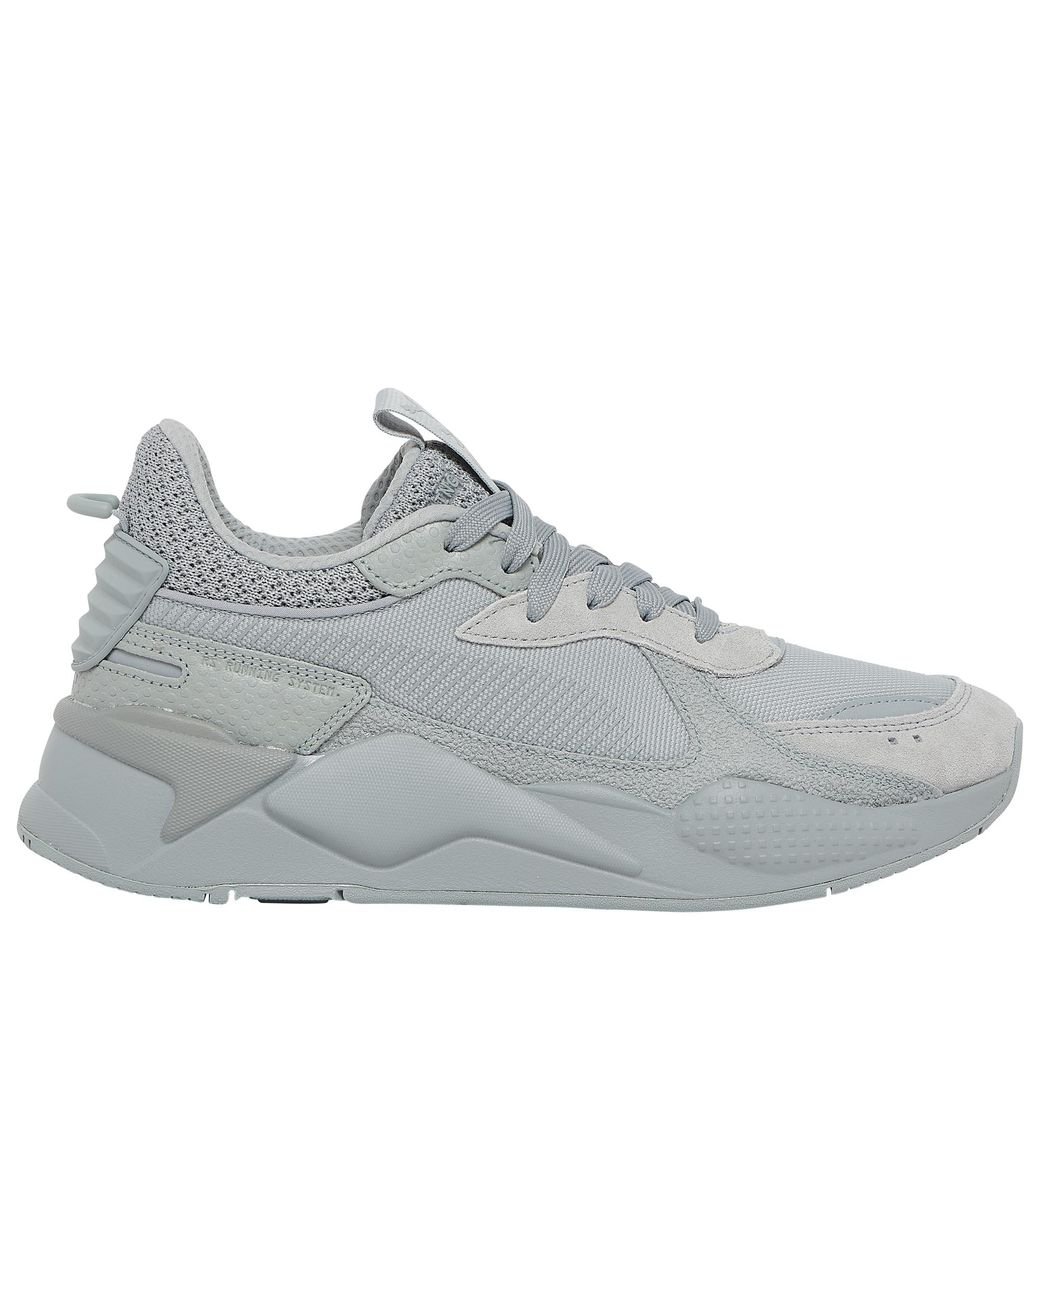 PUMA Rs-x - Shoes in Grey/Grey (Gray) for Men | Lyst